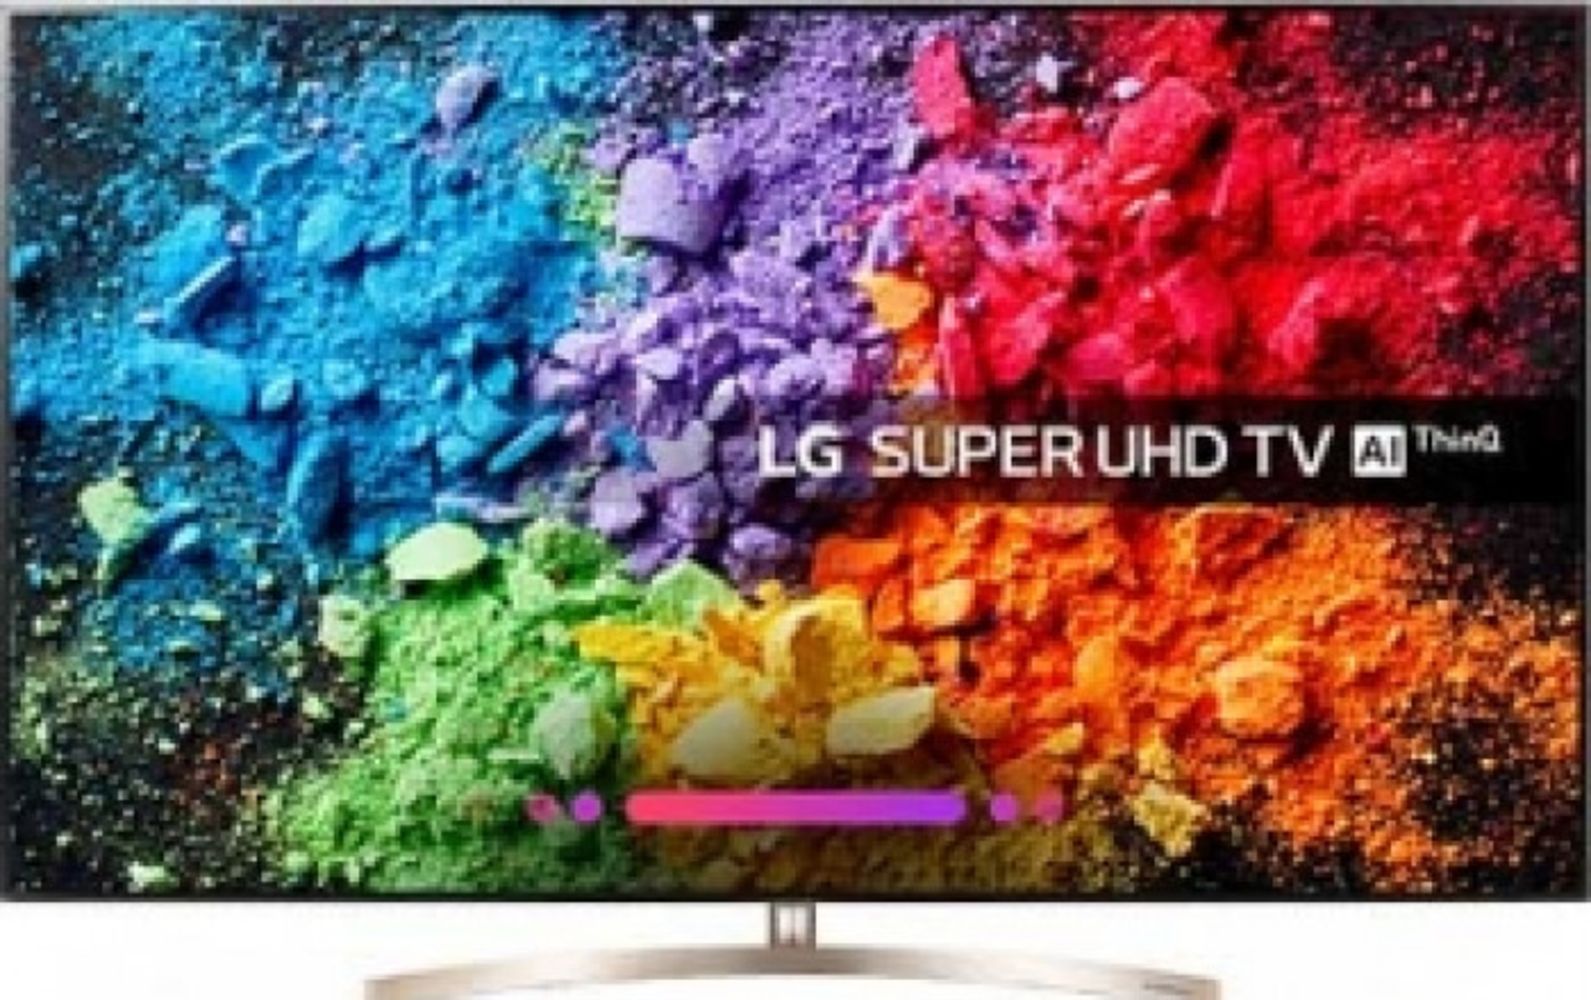 LG TVs & Monitors - Including 4K UHD Smart TVs In a Range of Screen Sizes up to 65 Inches